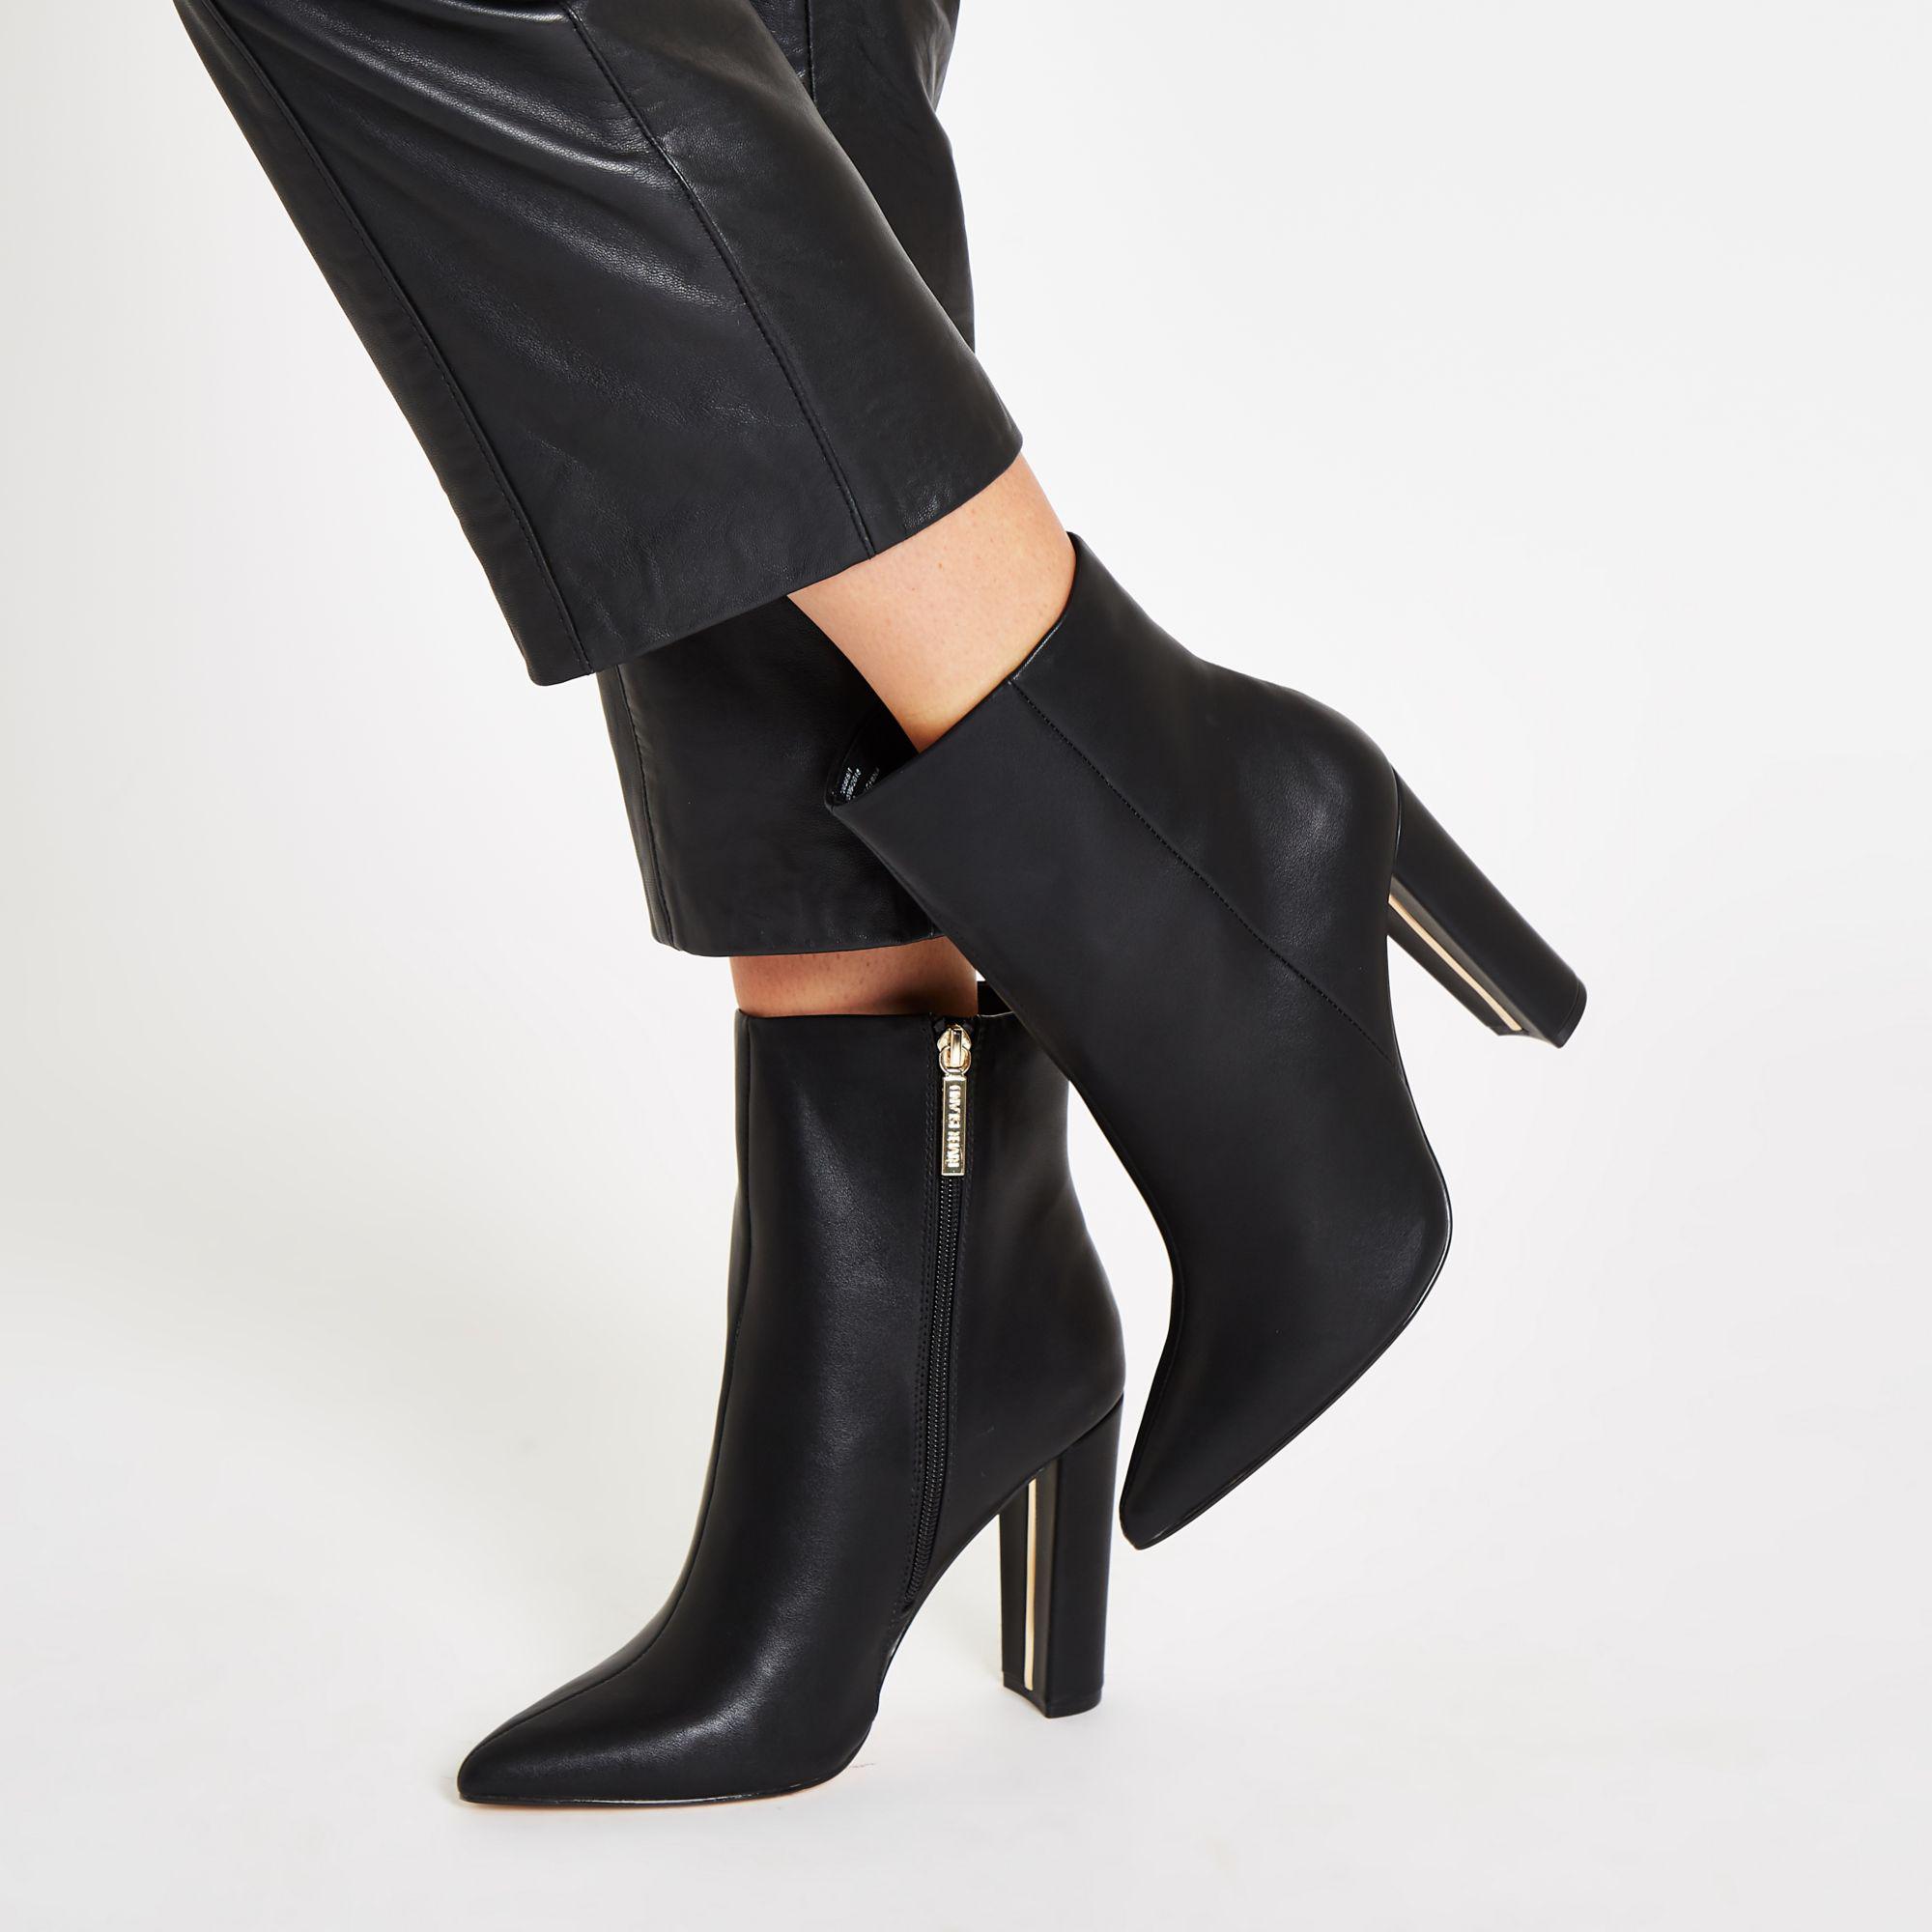 Black Pointed Toe Boots | vlr.eng.br